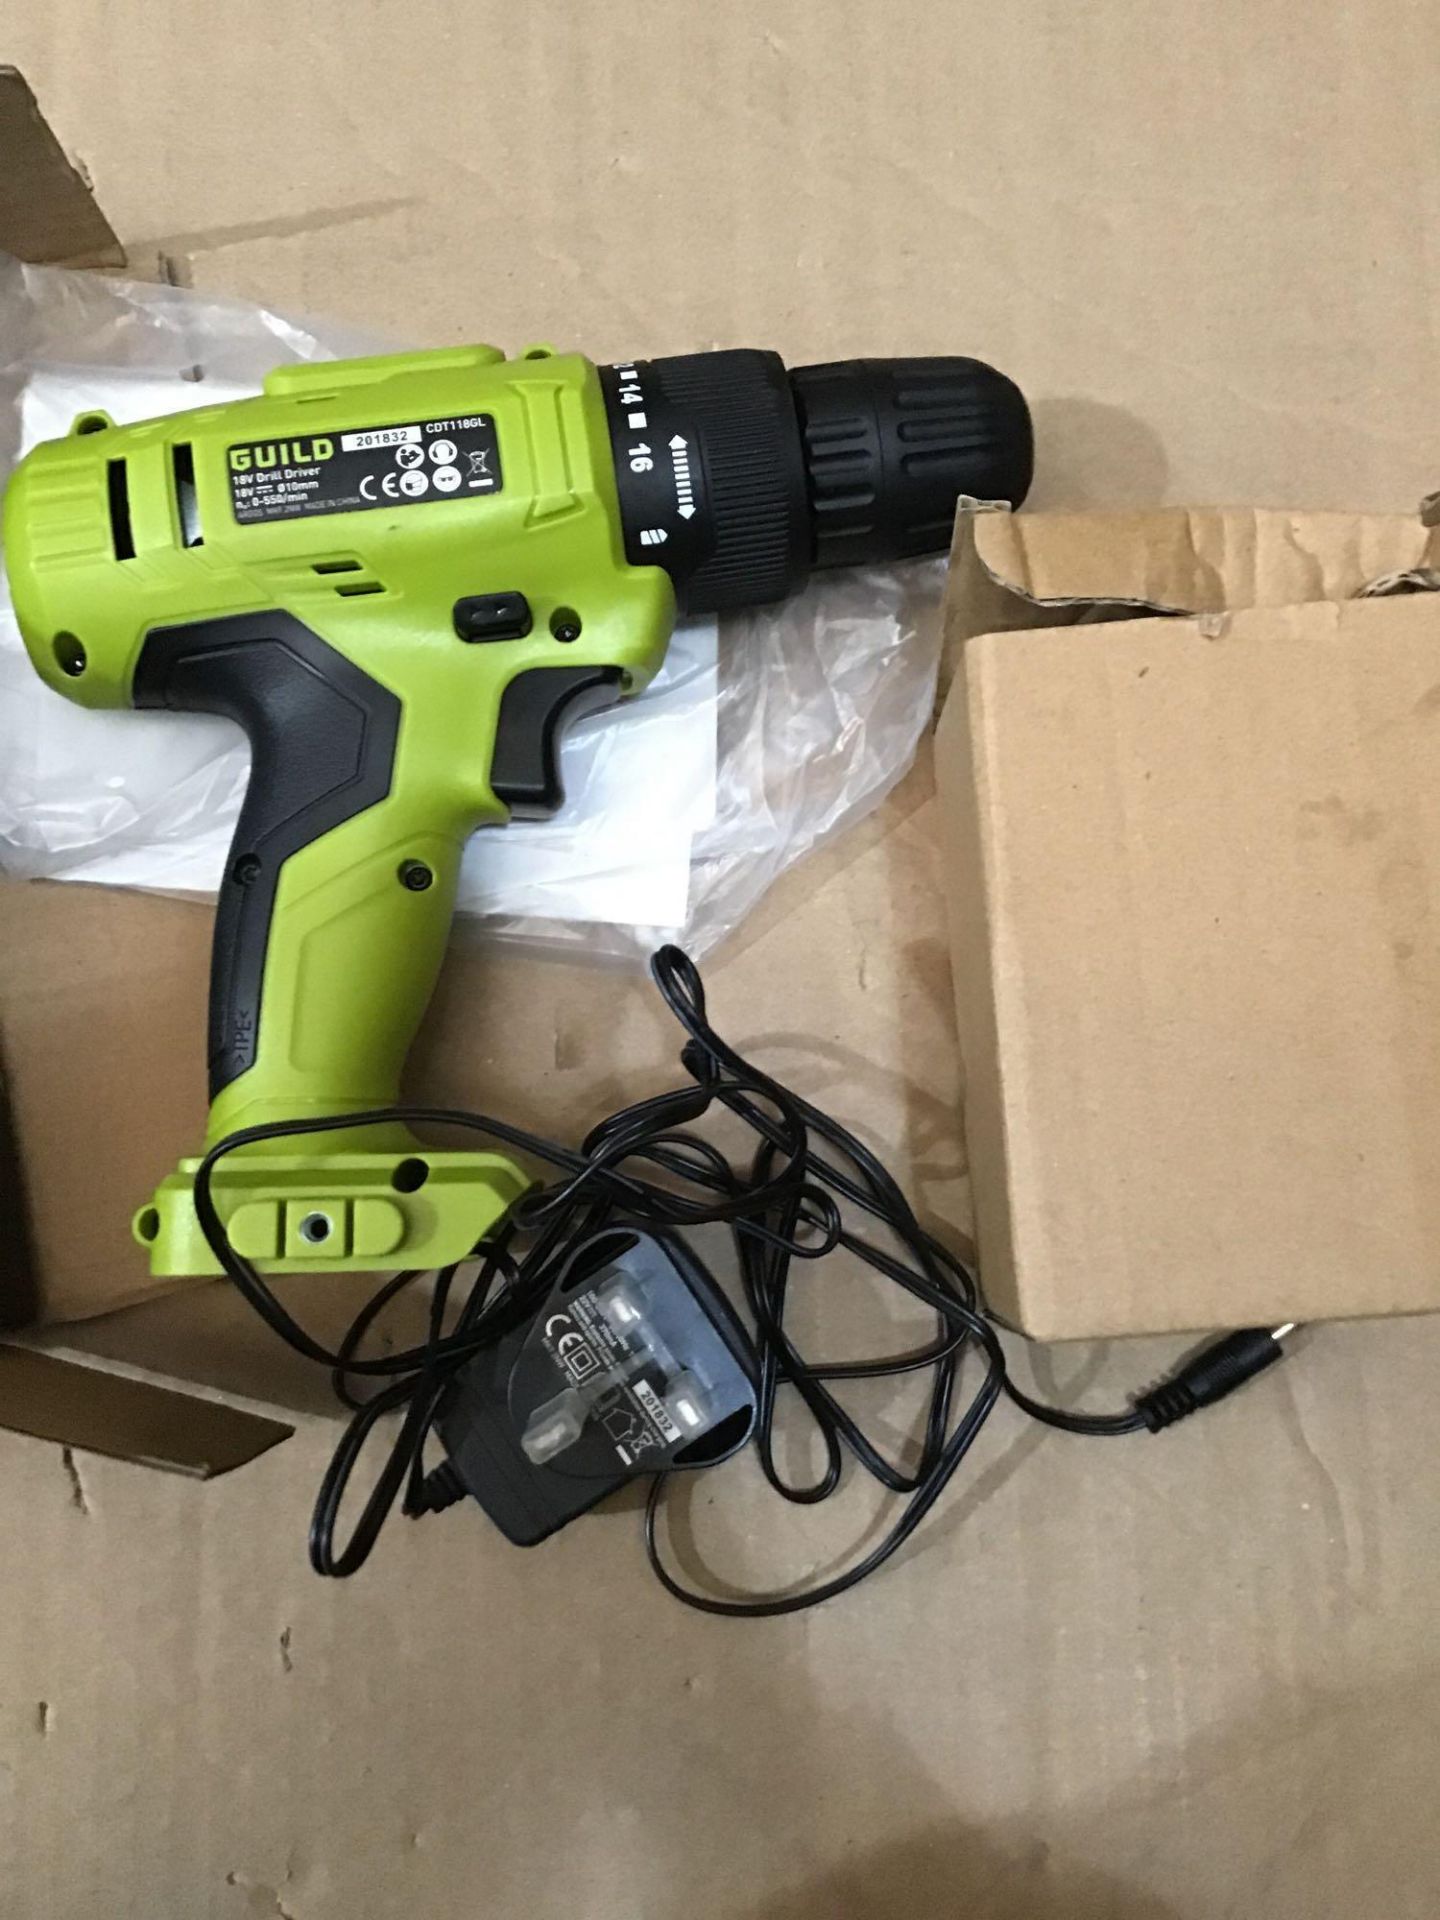 Guild 1.3AH Cordless Drill Driver - 18V, £40.00 RRP - Image 3 of 6